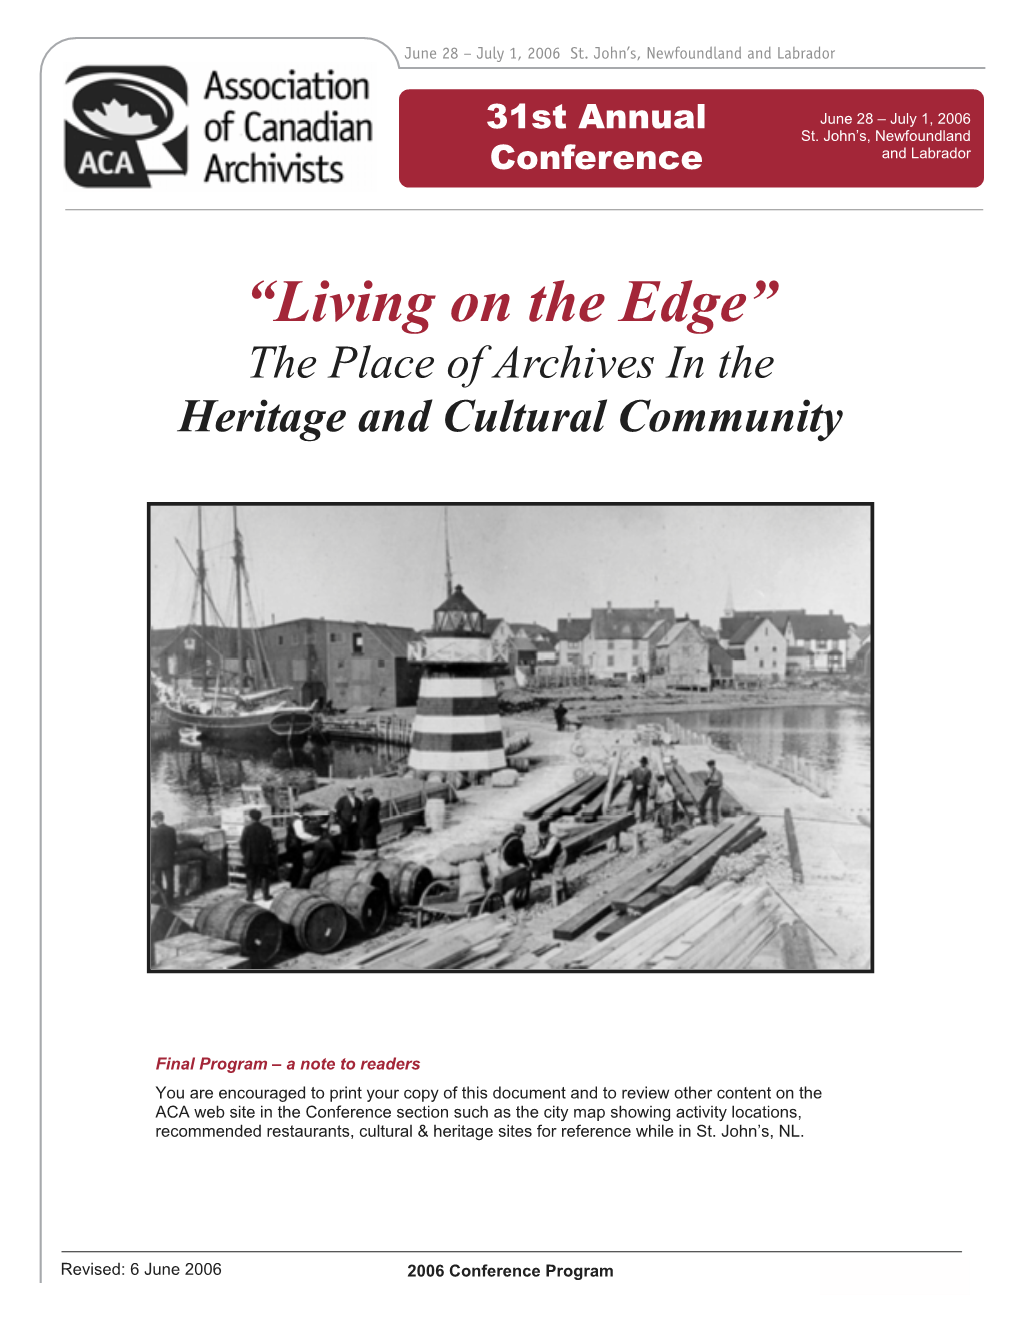 “Living on the Edge” the Place of Archives in the Heritage and Cultural Community